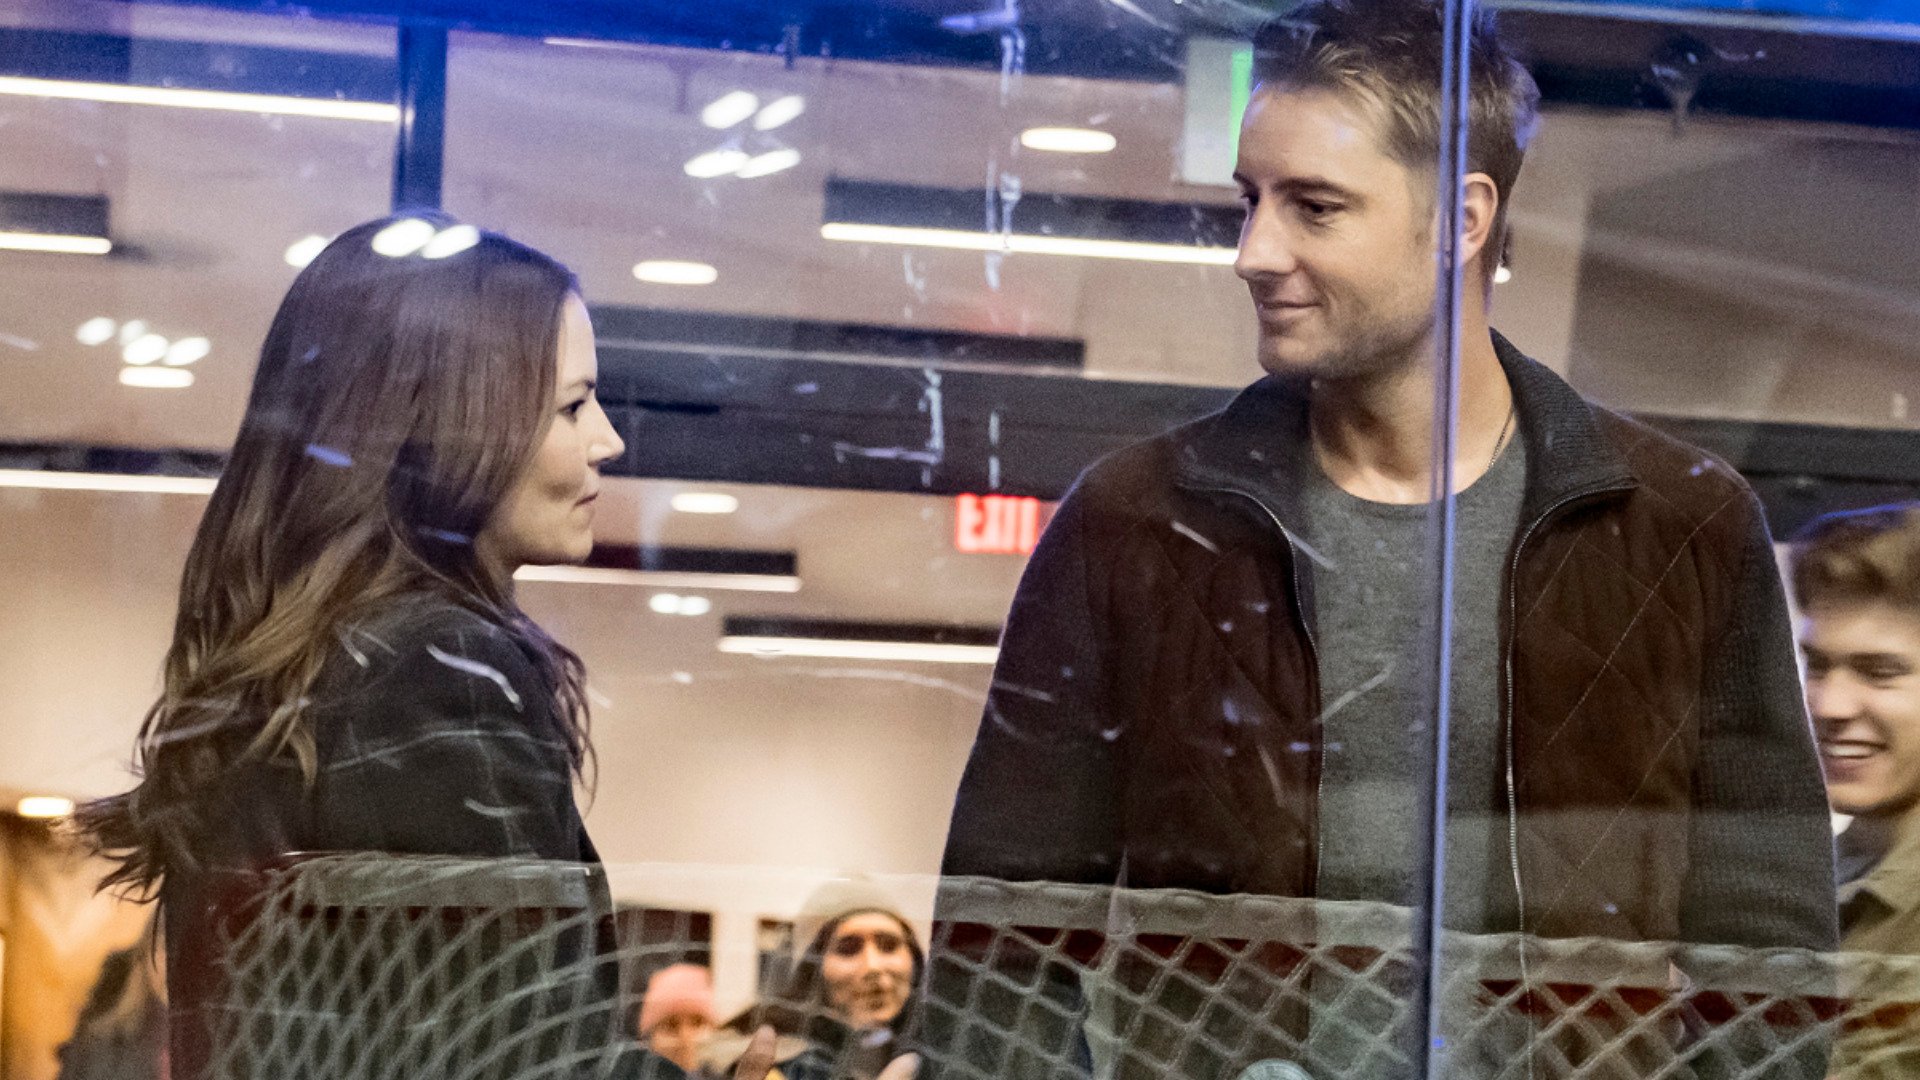 Jennifer Morrison as Cassidy and Justin Hartley as Kevin talk together in an ice arena in ‘This Is Us’ Season 4 Episode 5